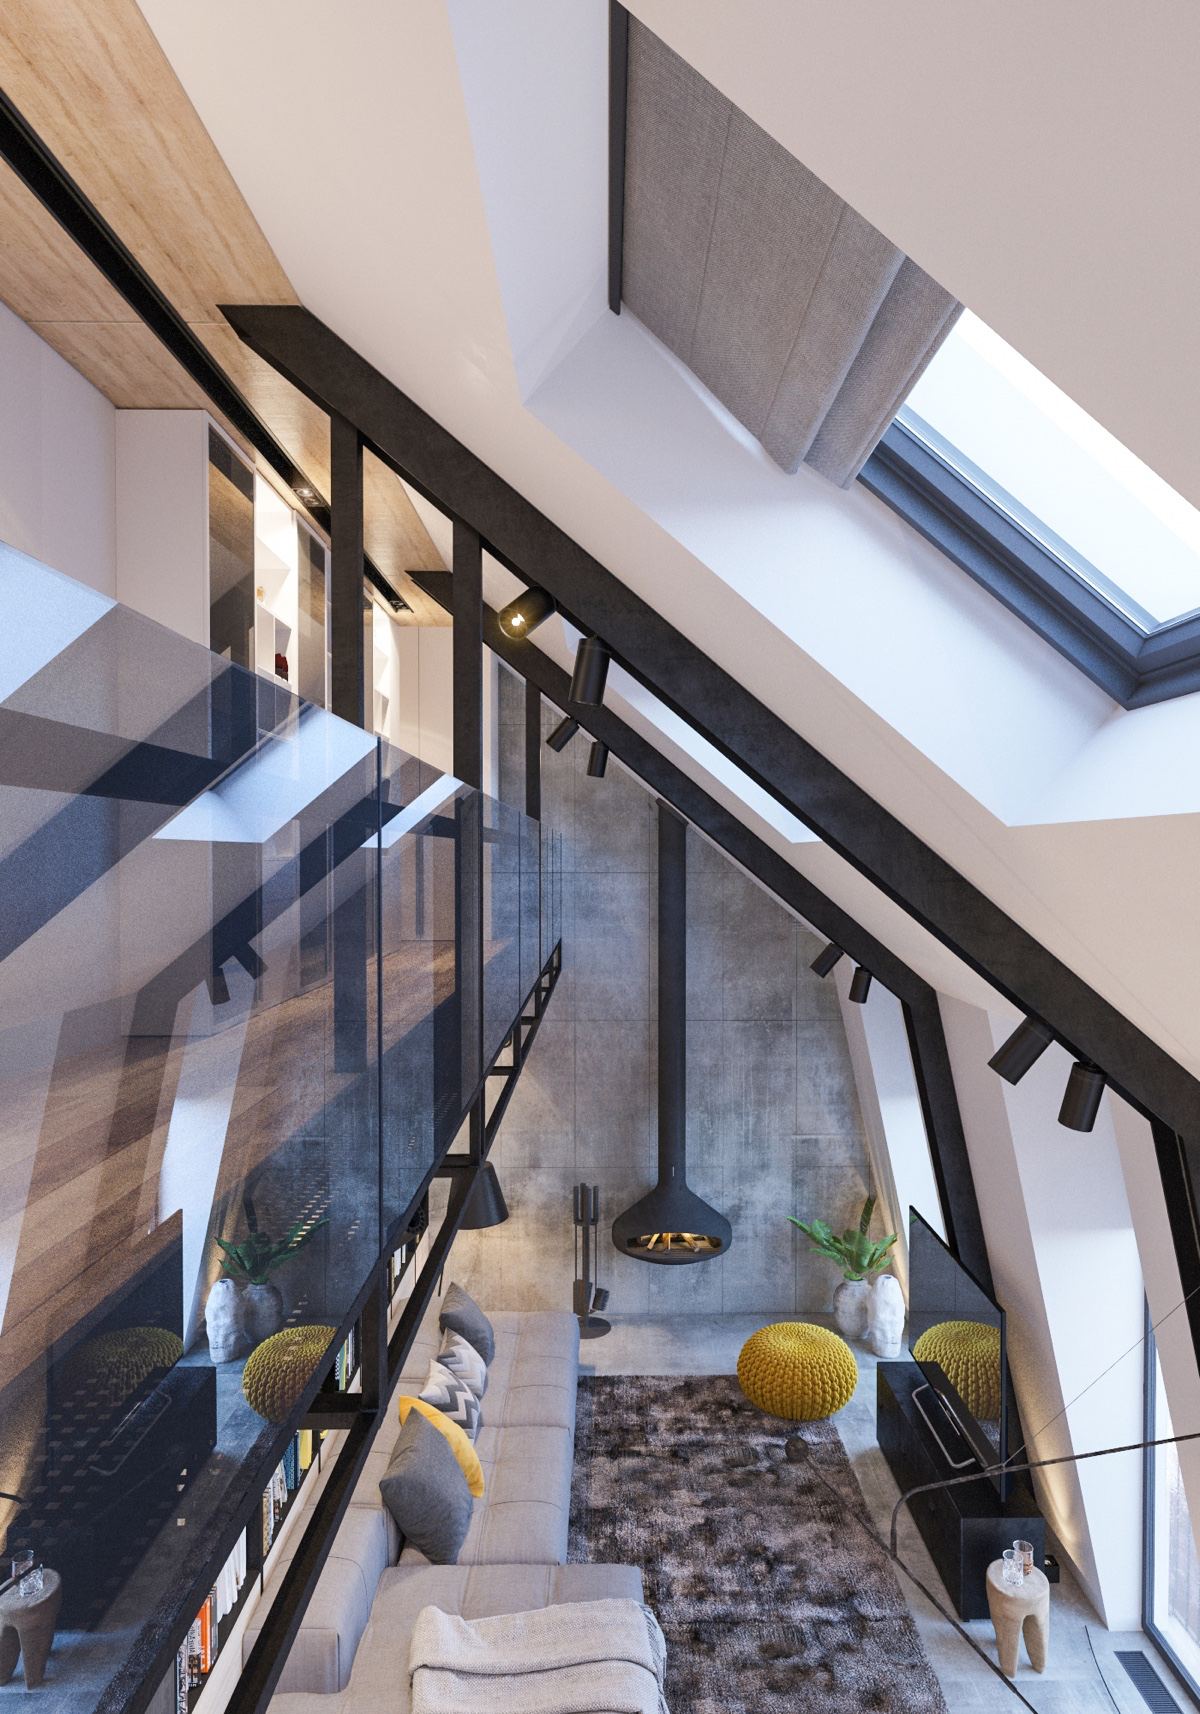 Attic Conversion Creates A Warm Contemporary Home With Floor Plans